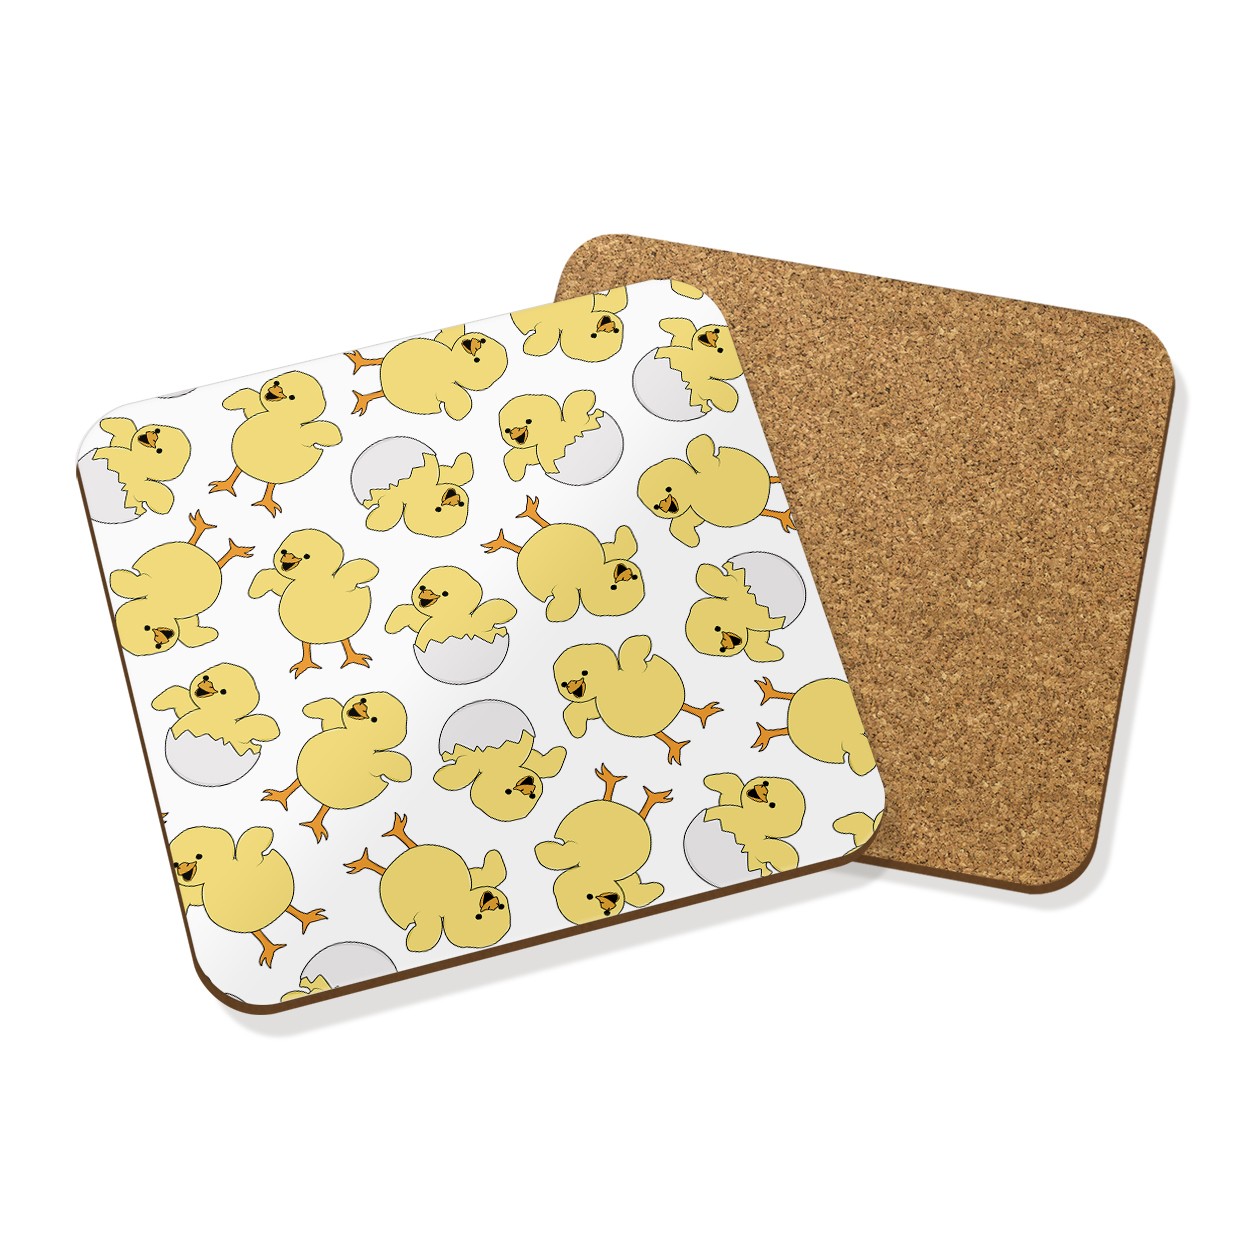 BABY CHICK DUCKLING DRINKS COASTER MAT CORK SQUARE SET X4 